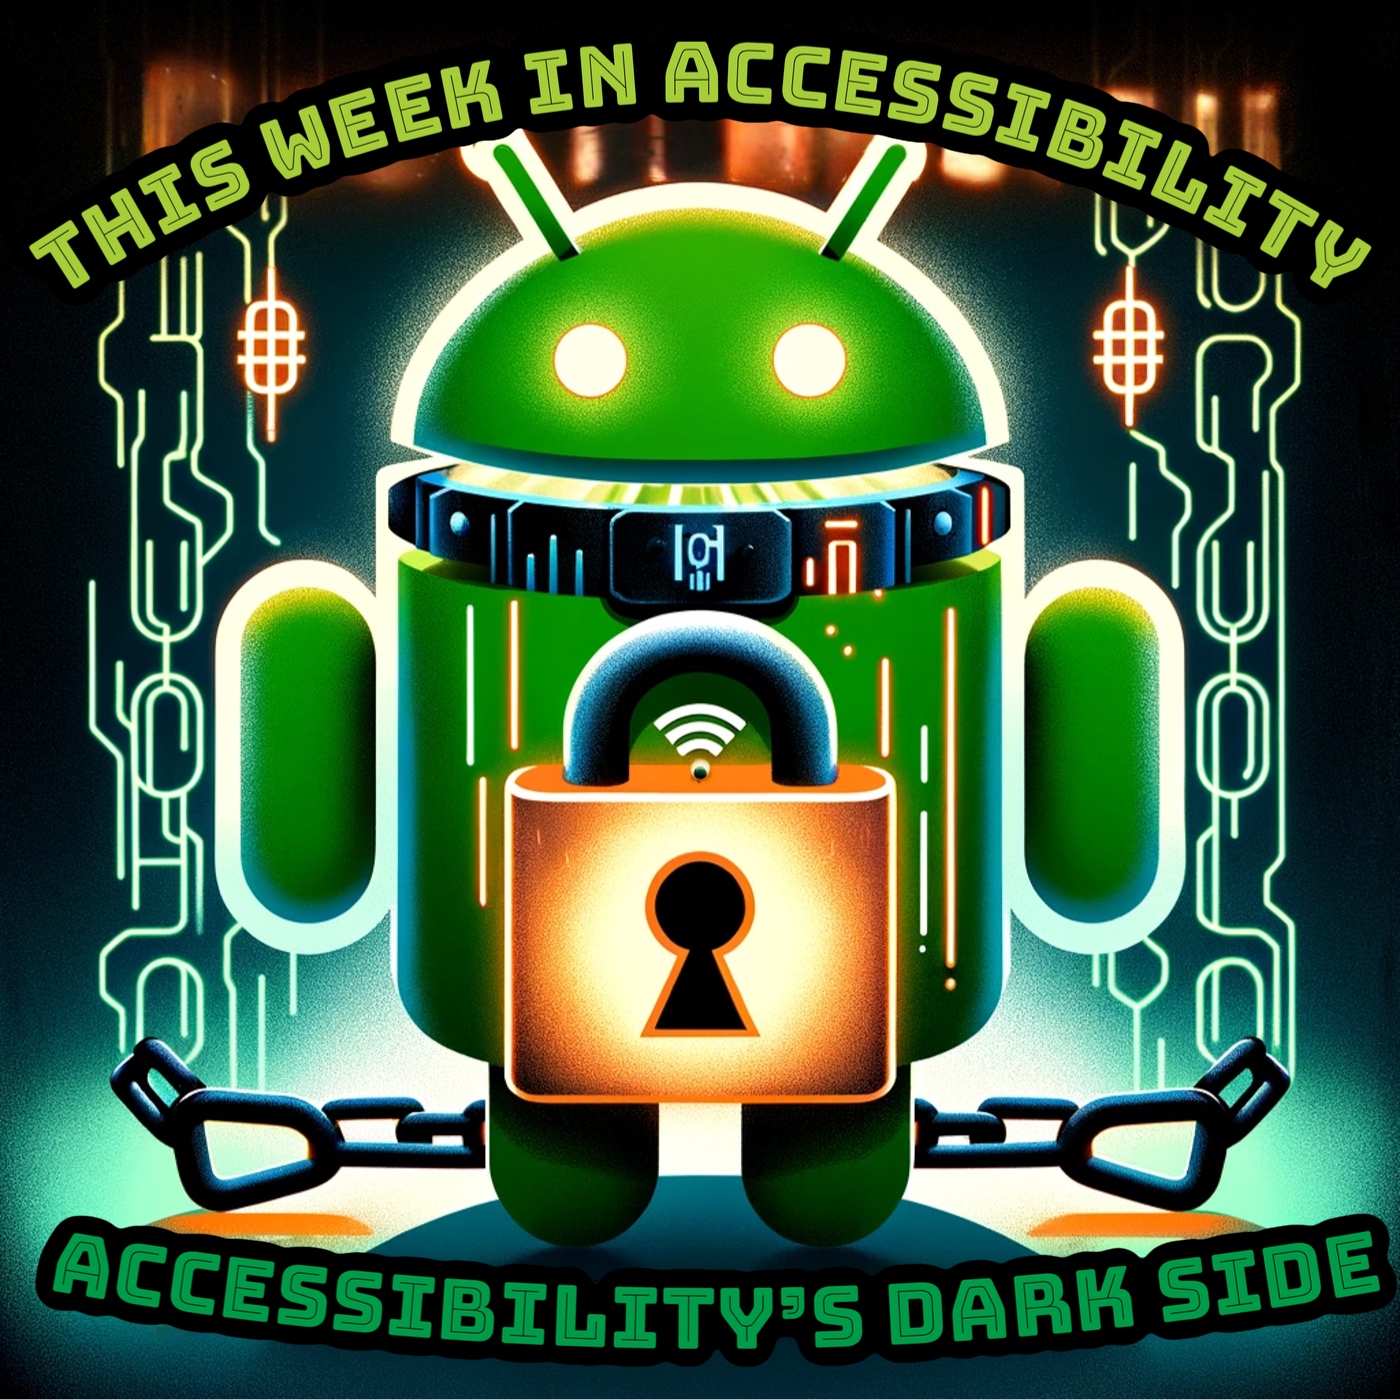 A digital design featuring the Android mascot with a padlock on its chest, signifying cybersecurity. The padlock showcases a WiFi signal and a broken chain, symbolizing internet security and overcoming restrictions. The image has a neon circuit pattern background, with the text "THIS WEEK IN ACCESSIBILITY" at the top and "ACCESSIBILITY'S DARK SIDE" at the bottom, suggesting technological accessibility issues. The design has a vibrant, retro-futuristic aesthetic with neon lights and cyberpunk elements.